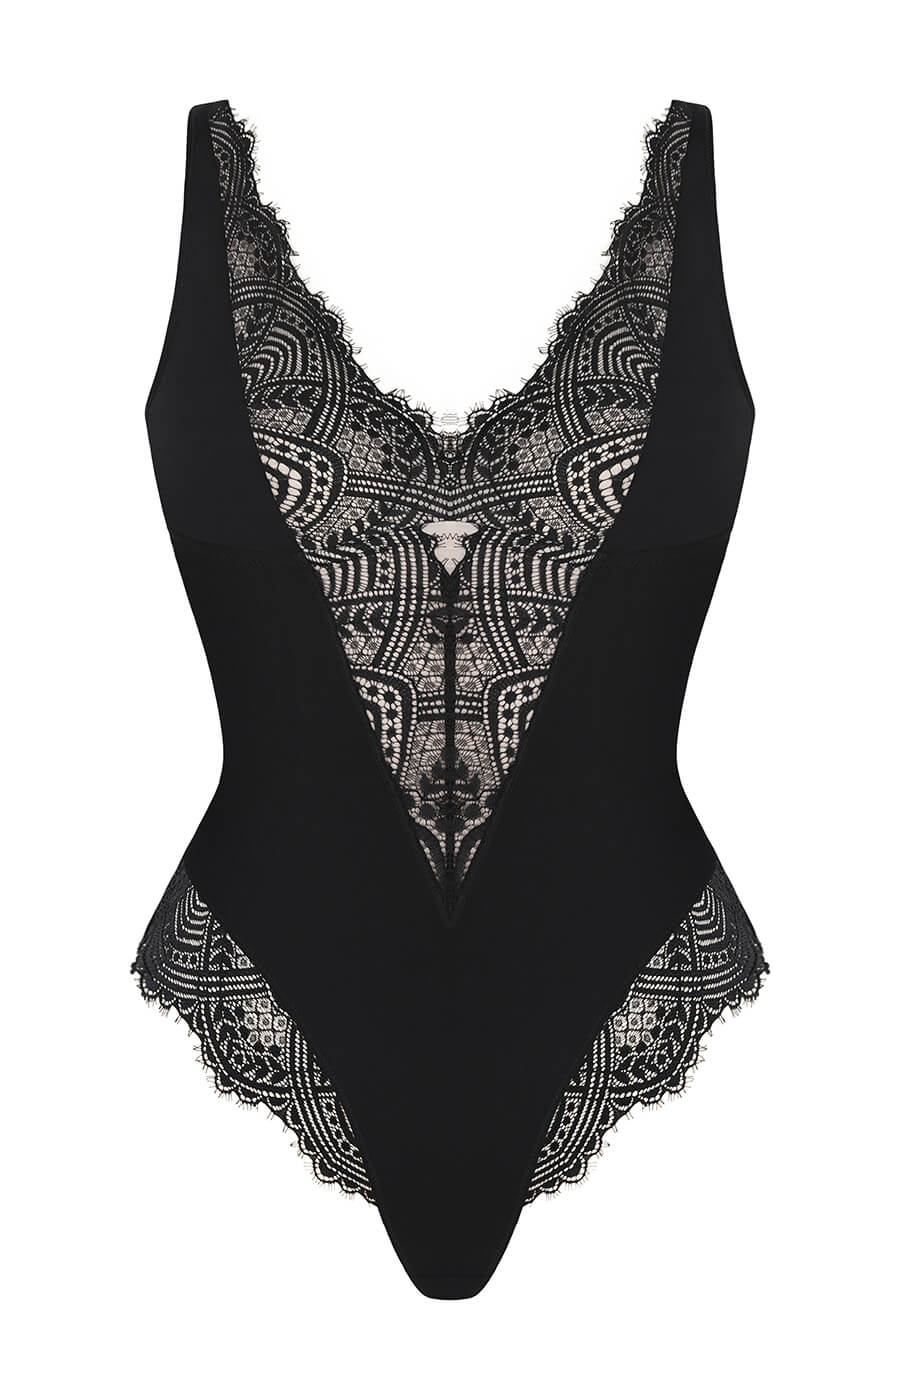 AirSlim® Go Braless Shaping Lace Bodysuit